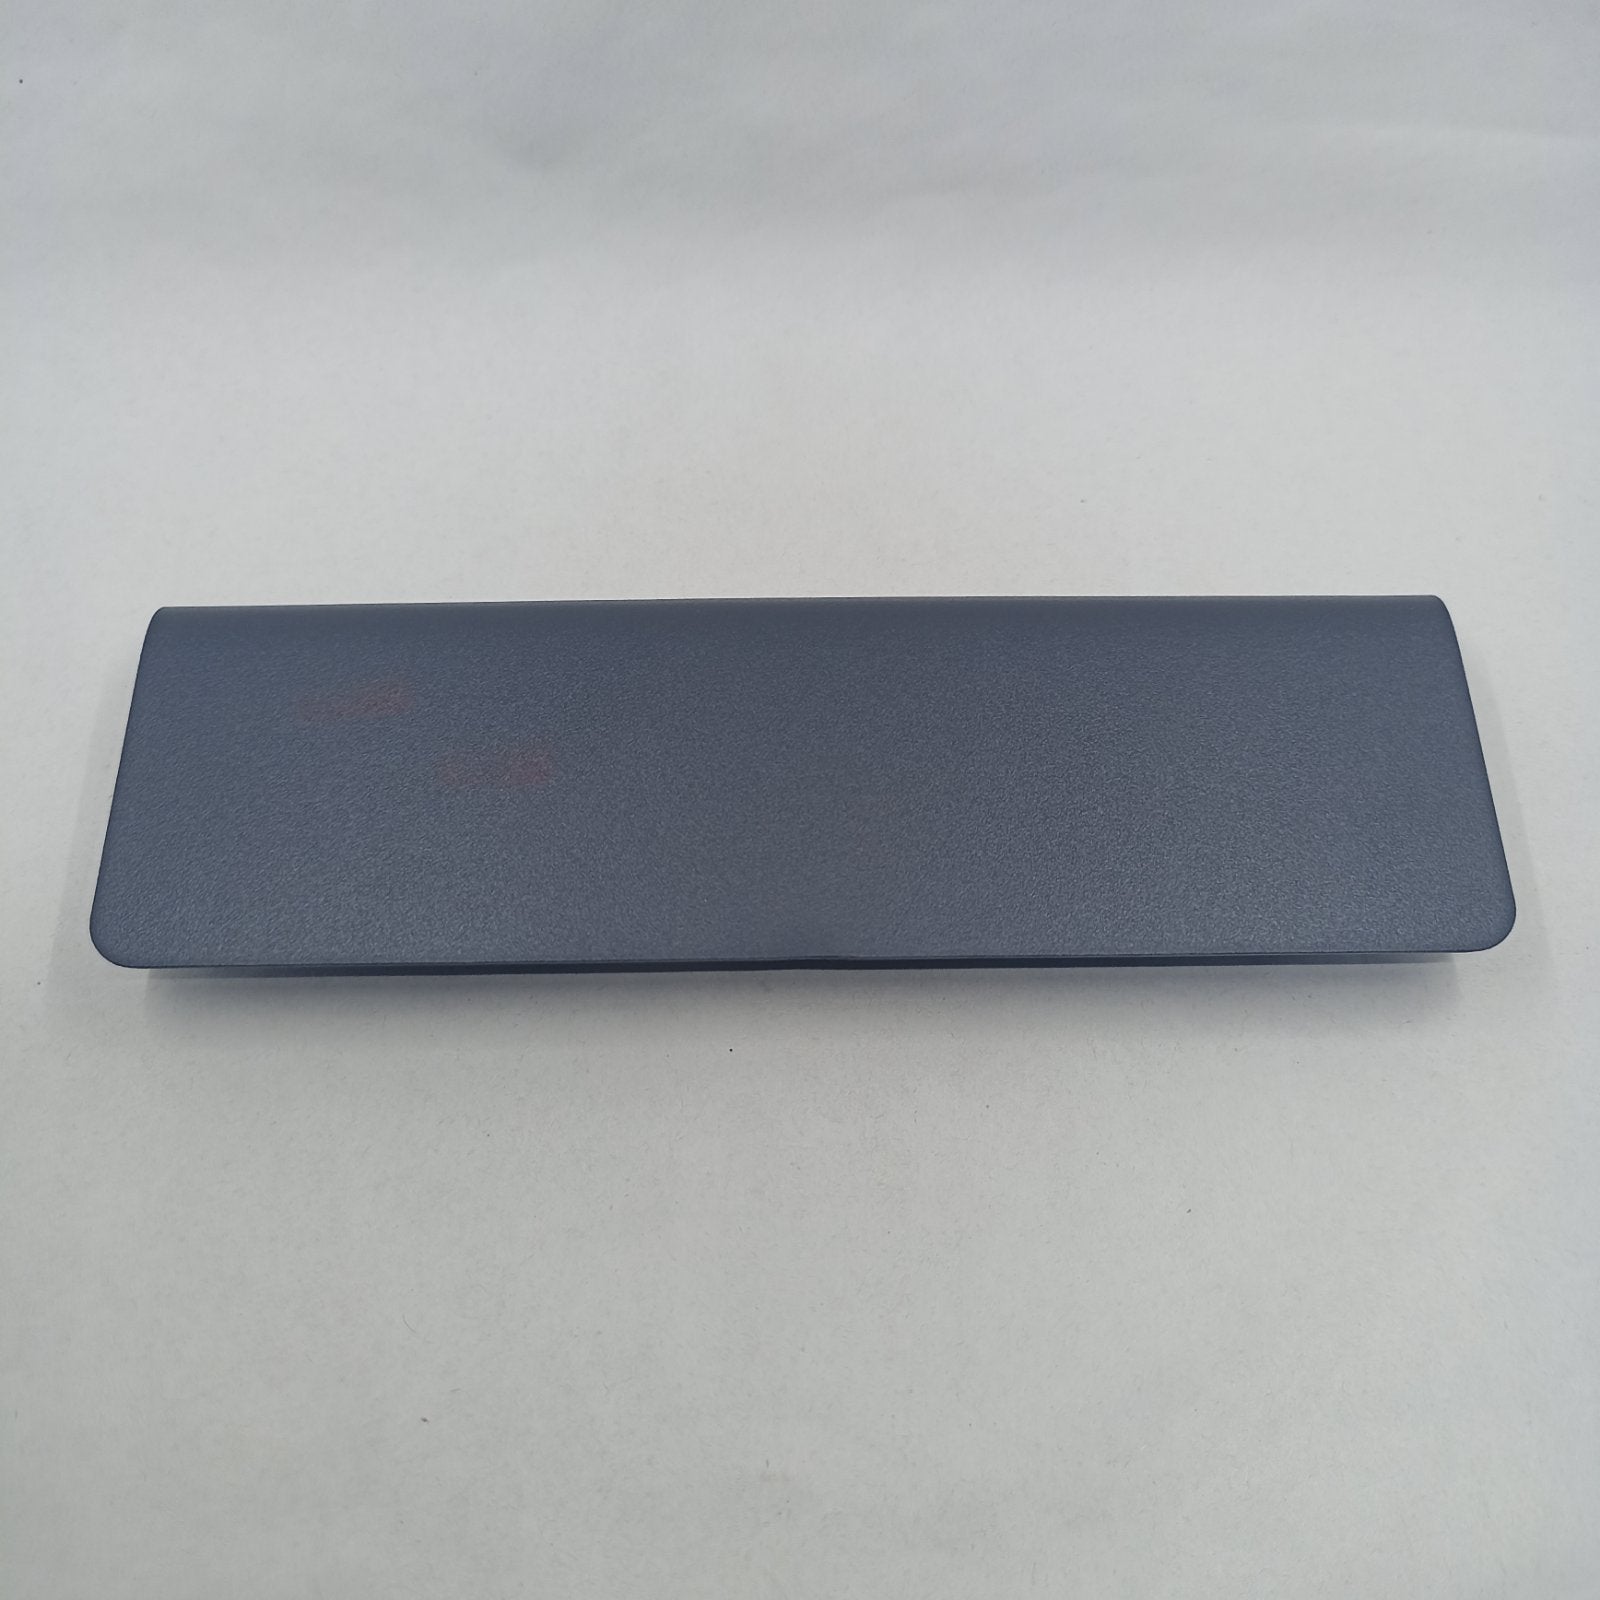 Replacement Battery for Asus G551VW A1